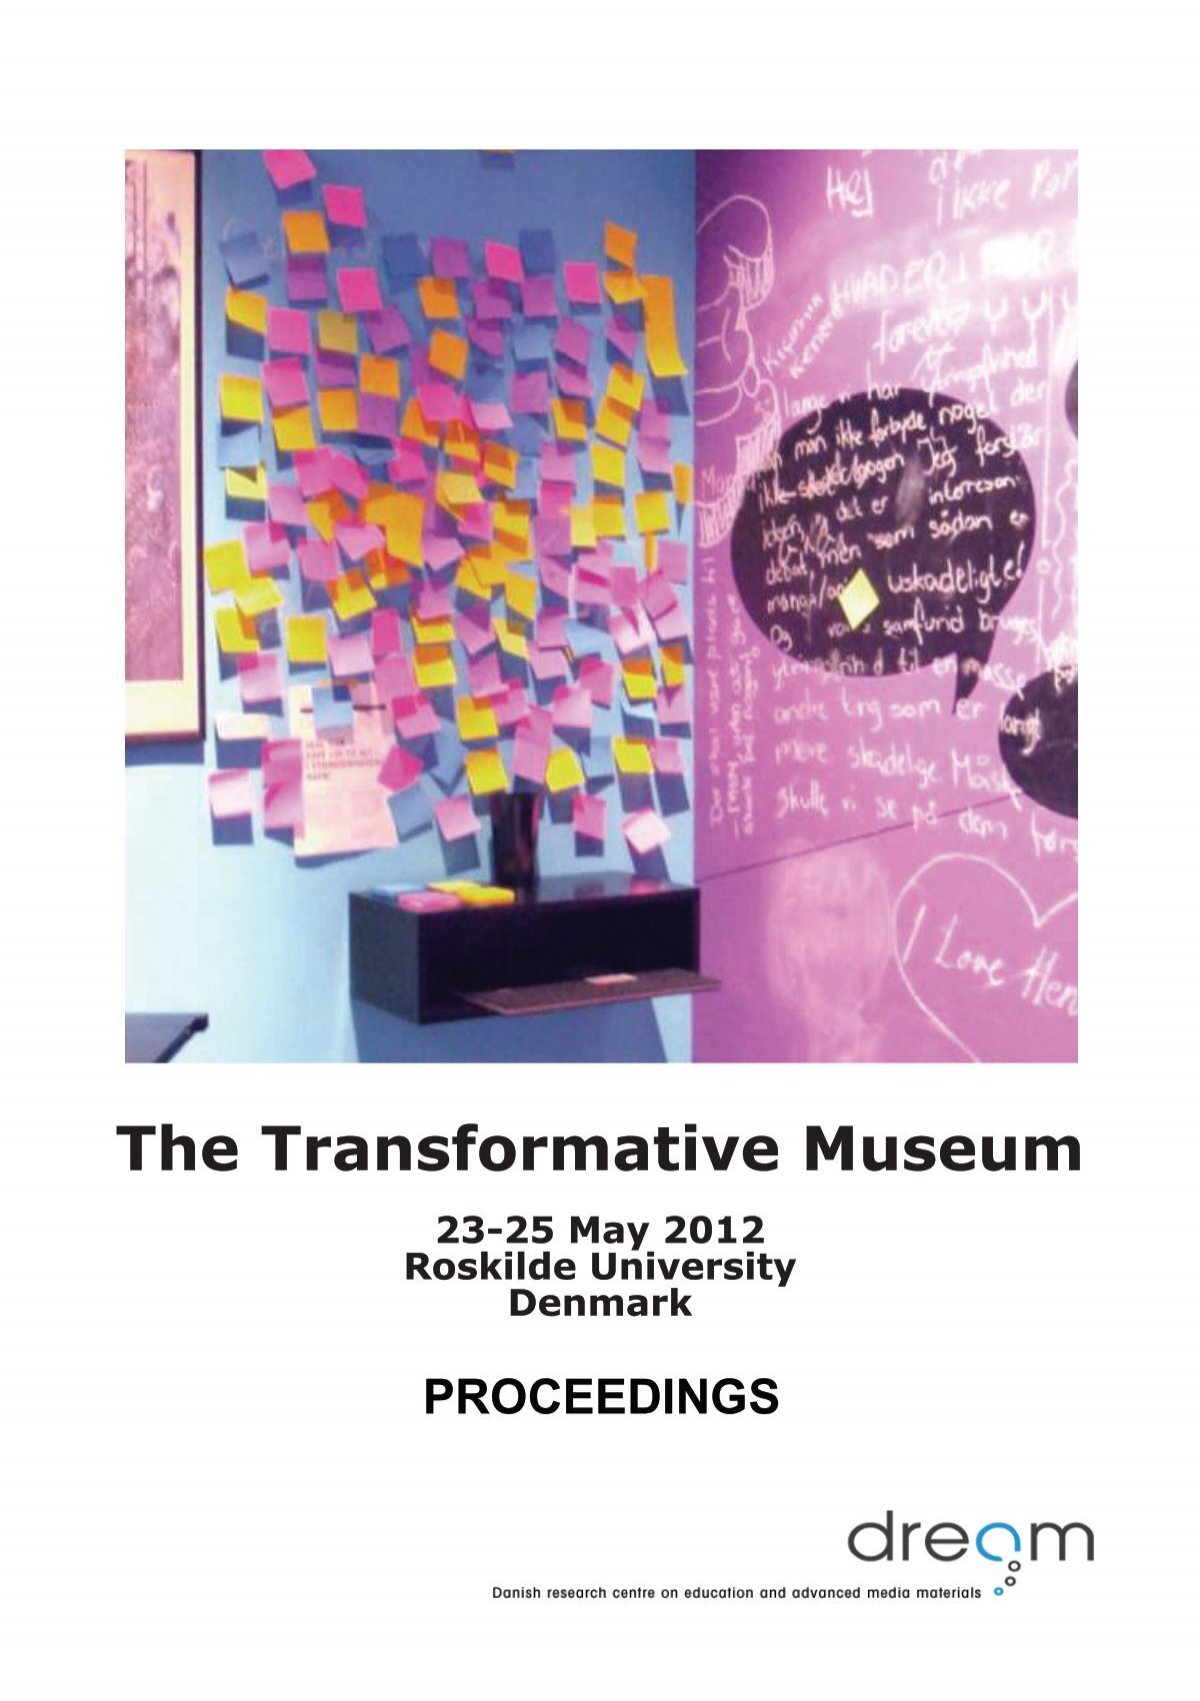 Making meaning in an exhibition: Technologies, agency and